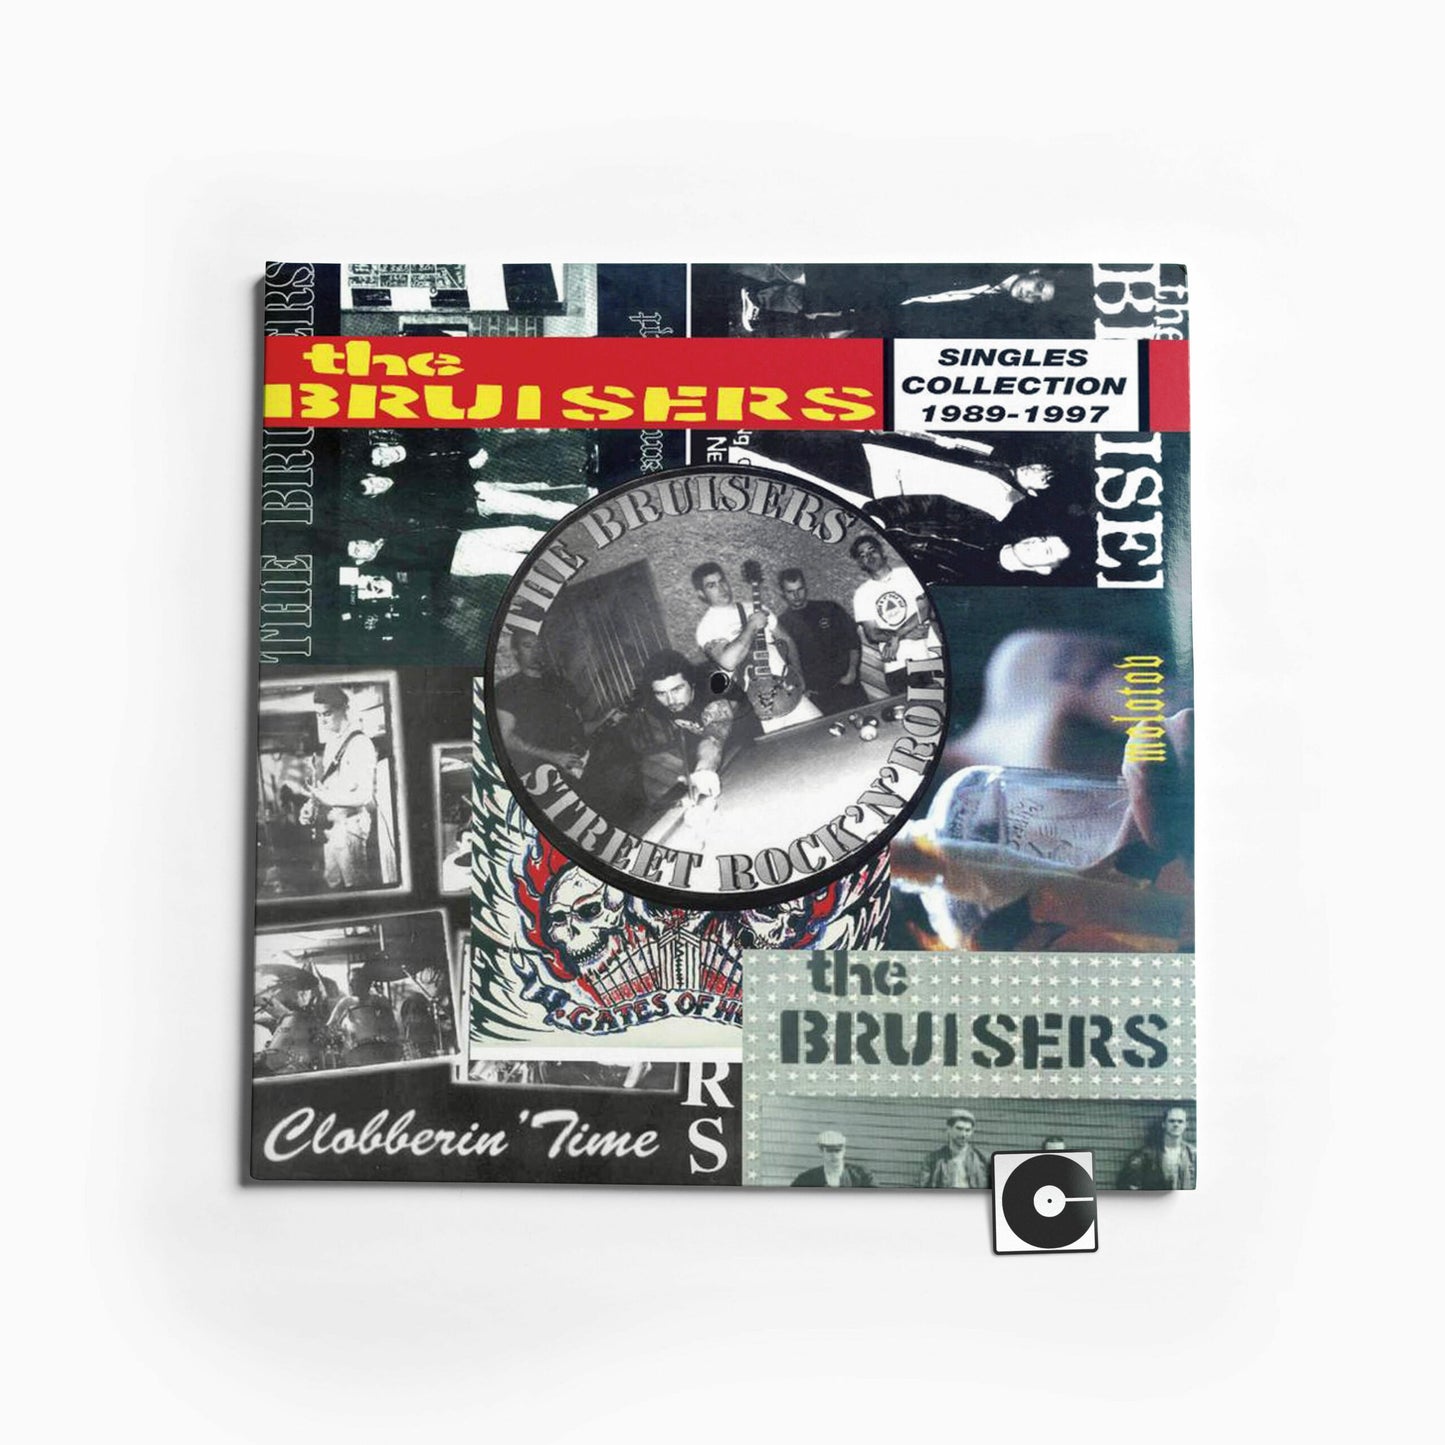 The Bruisers - "The Bruisers Singles Collection 1989-1997"